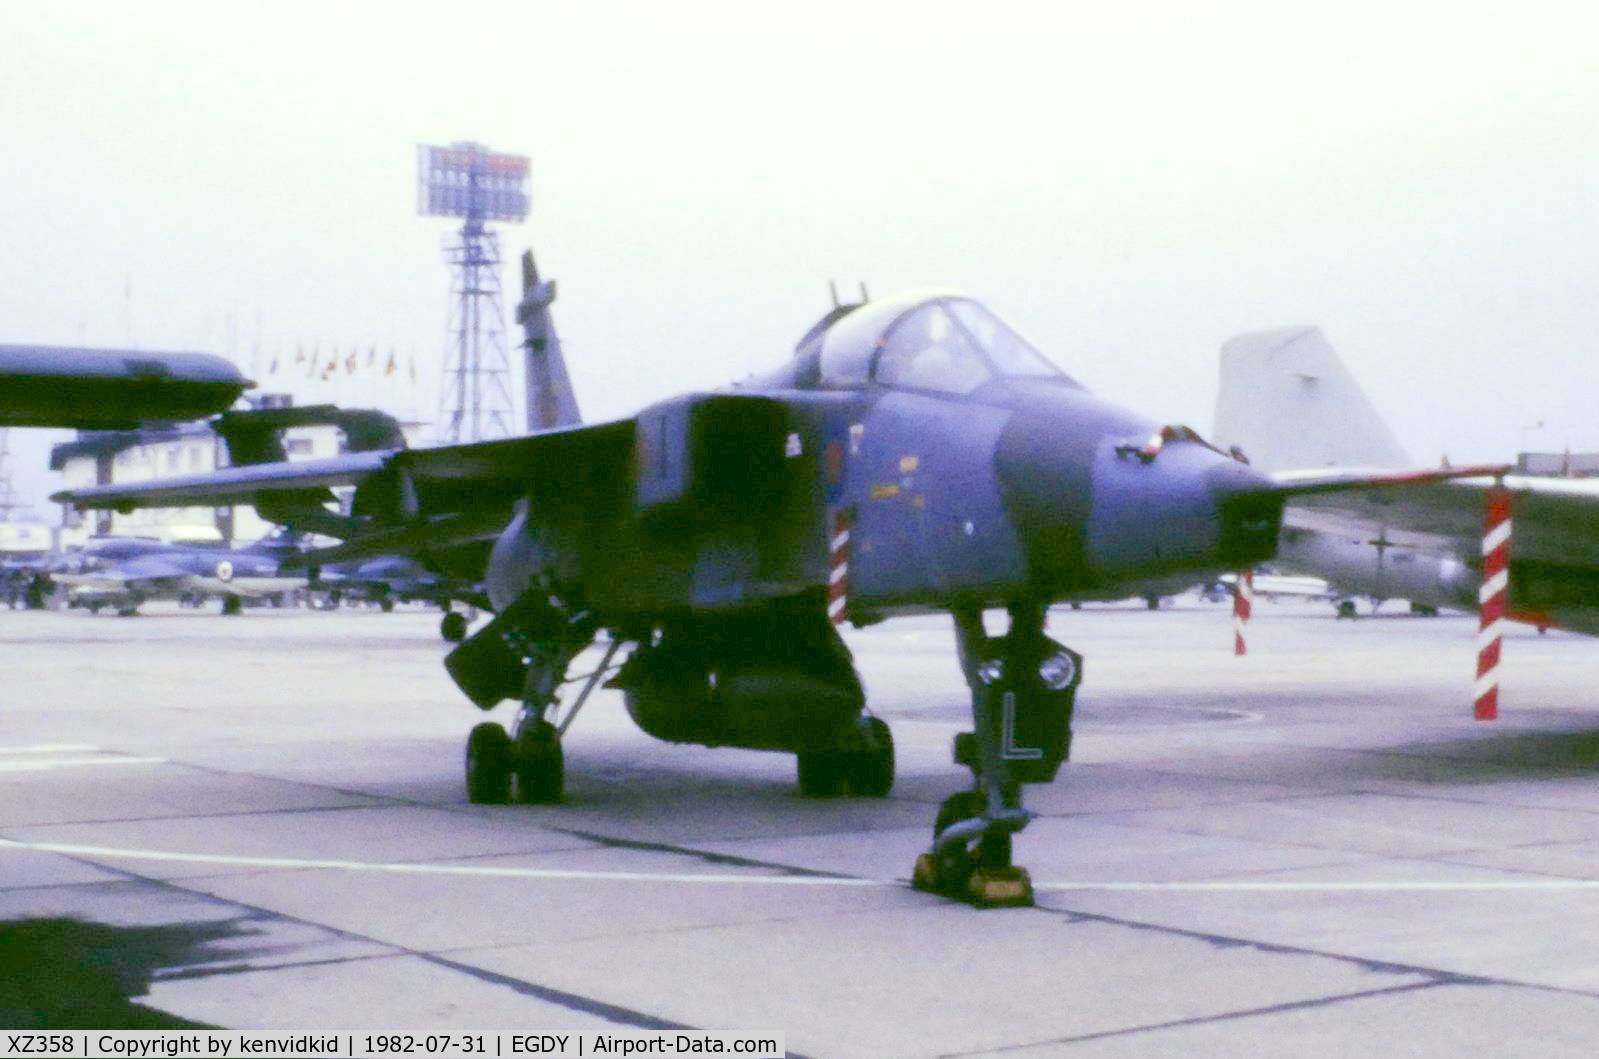 XZ358, 1976 Sepecat Jaguar GR.1A C/N S.125, On static display at the 1982 Yeovilton air show.